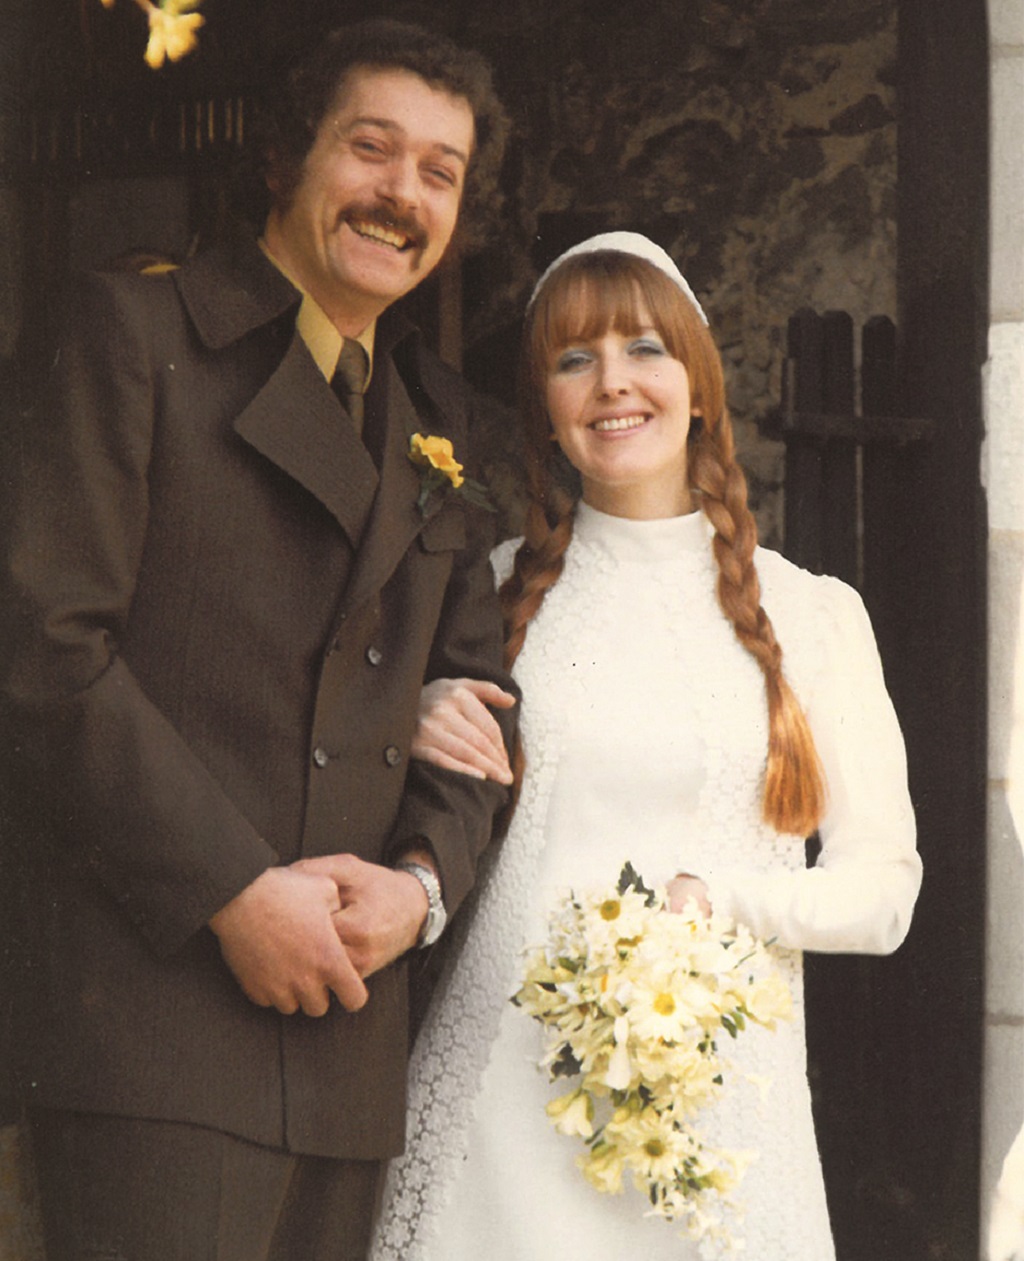 Sheila Fleet wearing her lace daisy dress on her wedding day to Rick